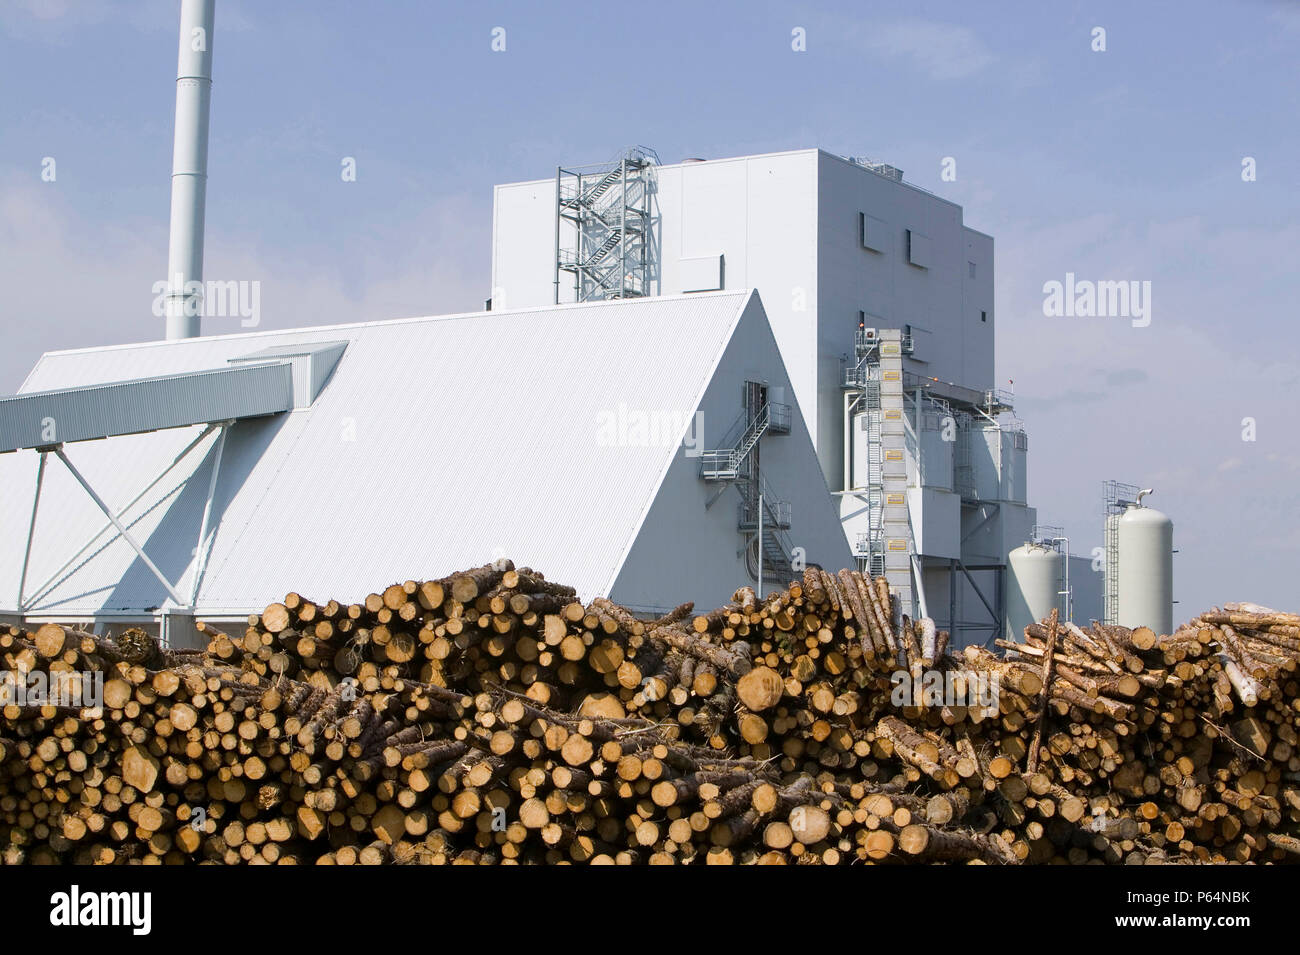 E.ON's biofuel power station in Lockerbie Scotland with timber supplies.The power station is fuelled 100% by wood sourced from local woodlands and gen Stock Photo